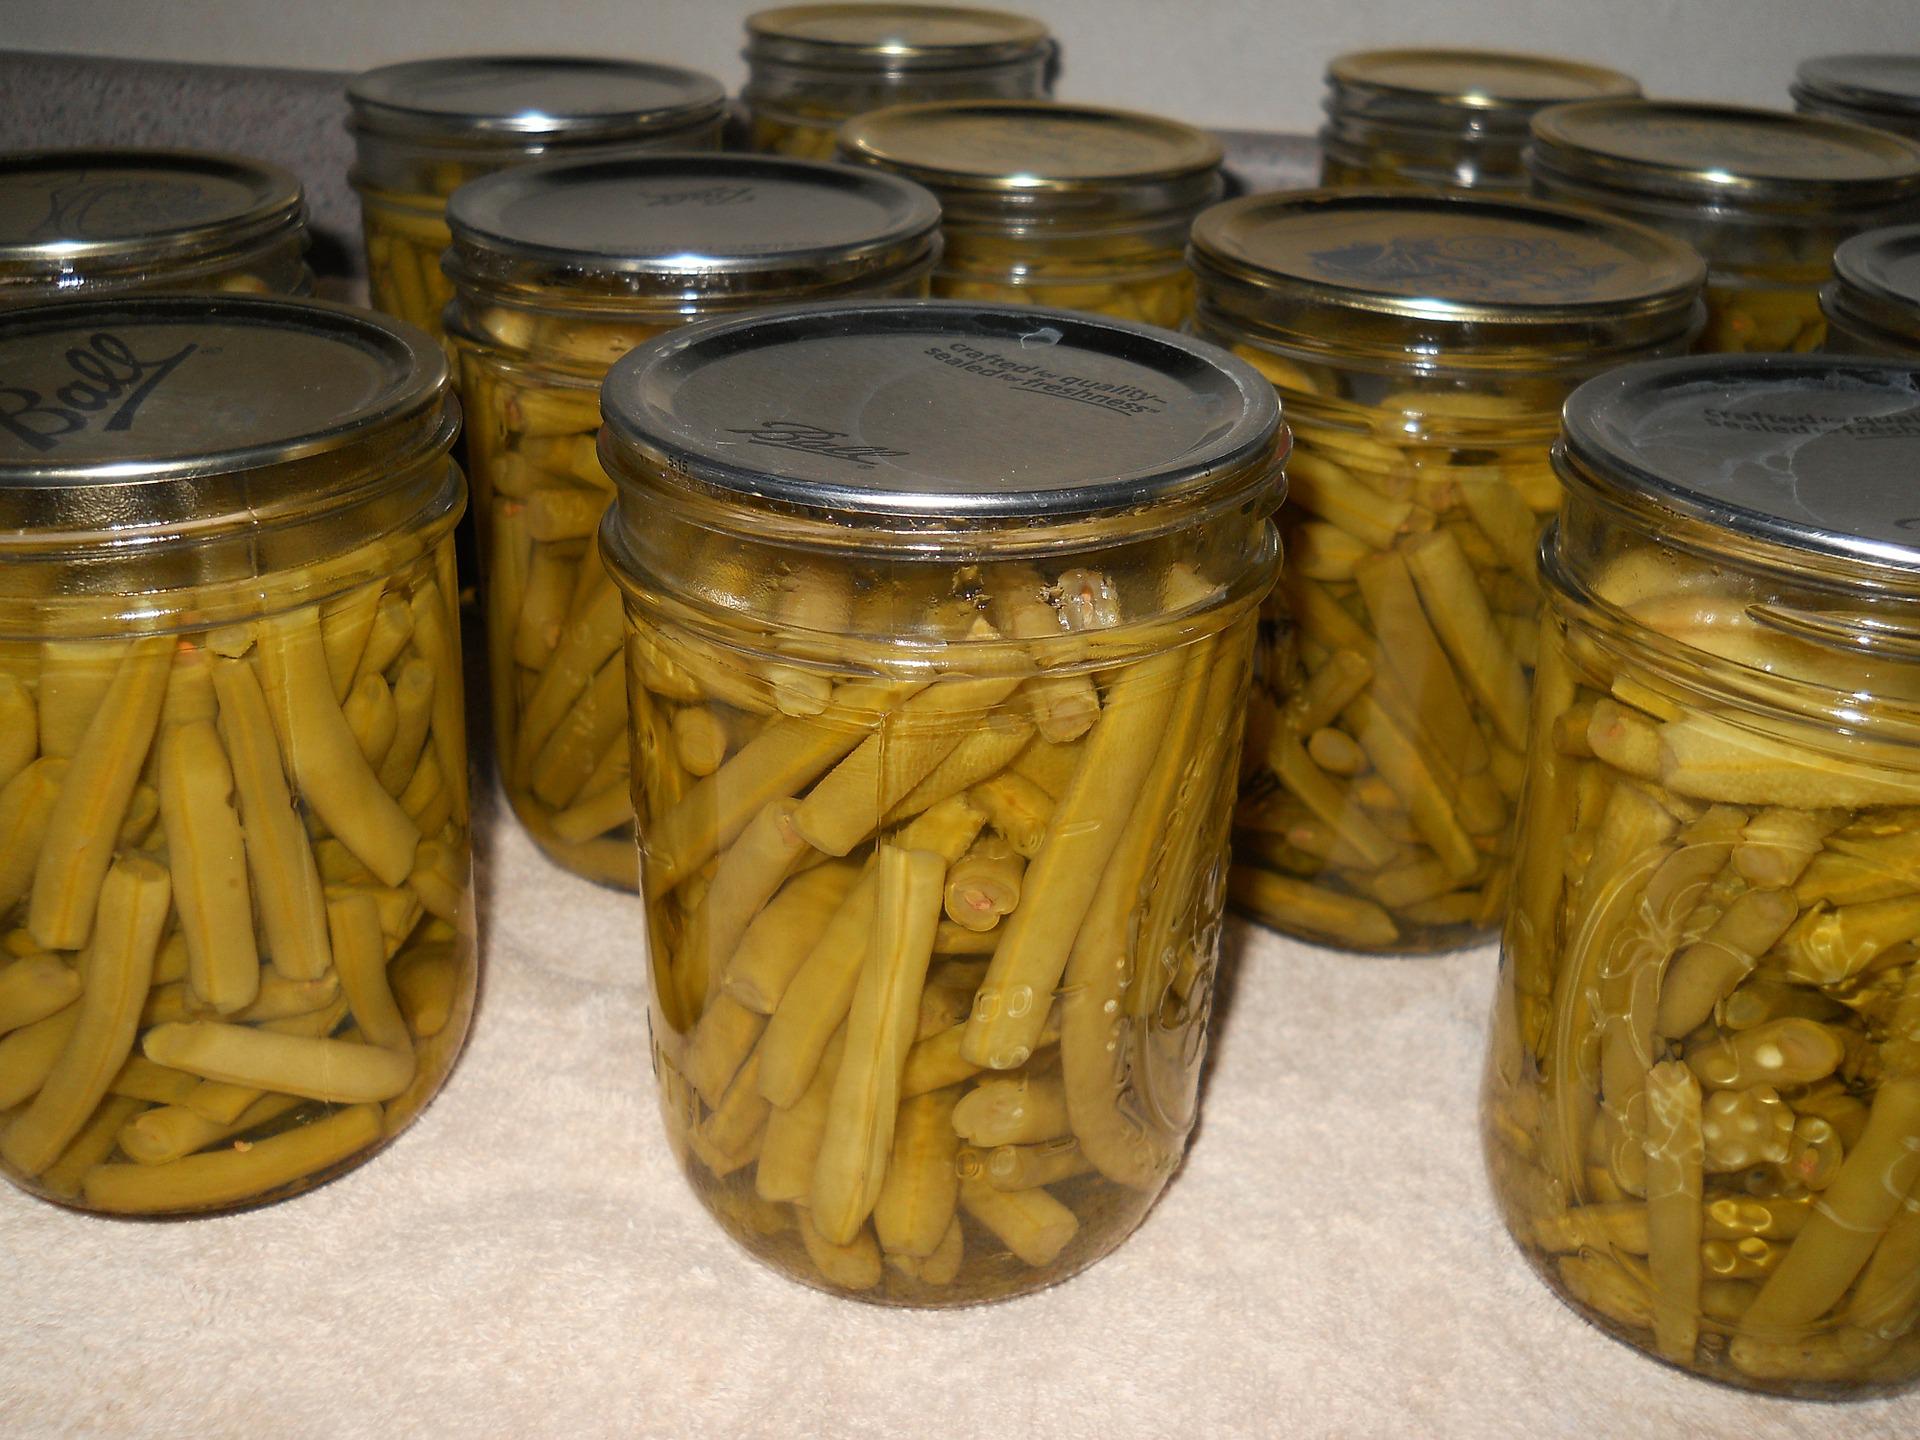 Green Beans in Canning Jars